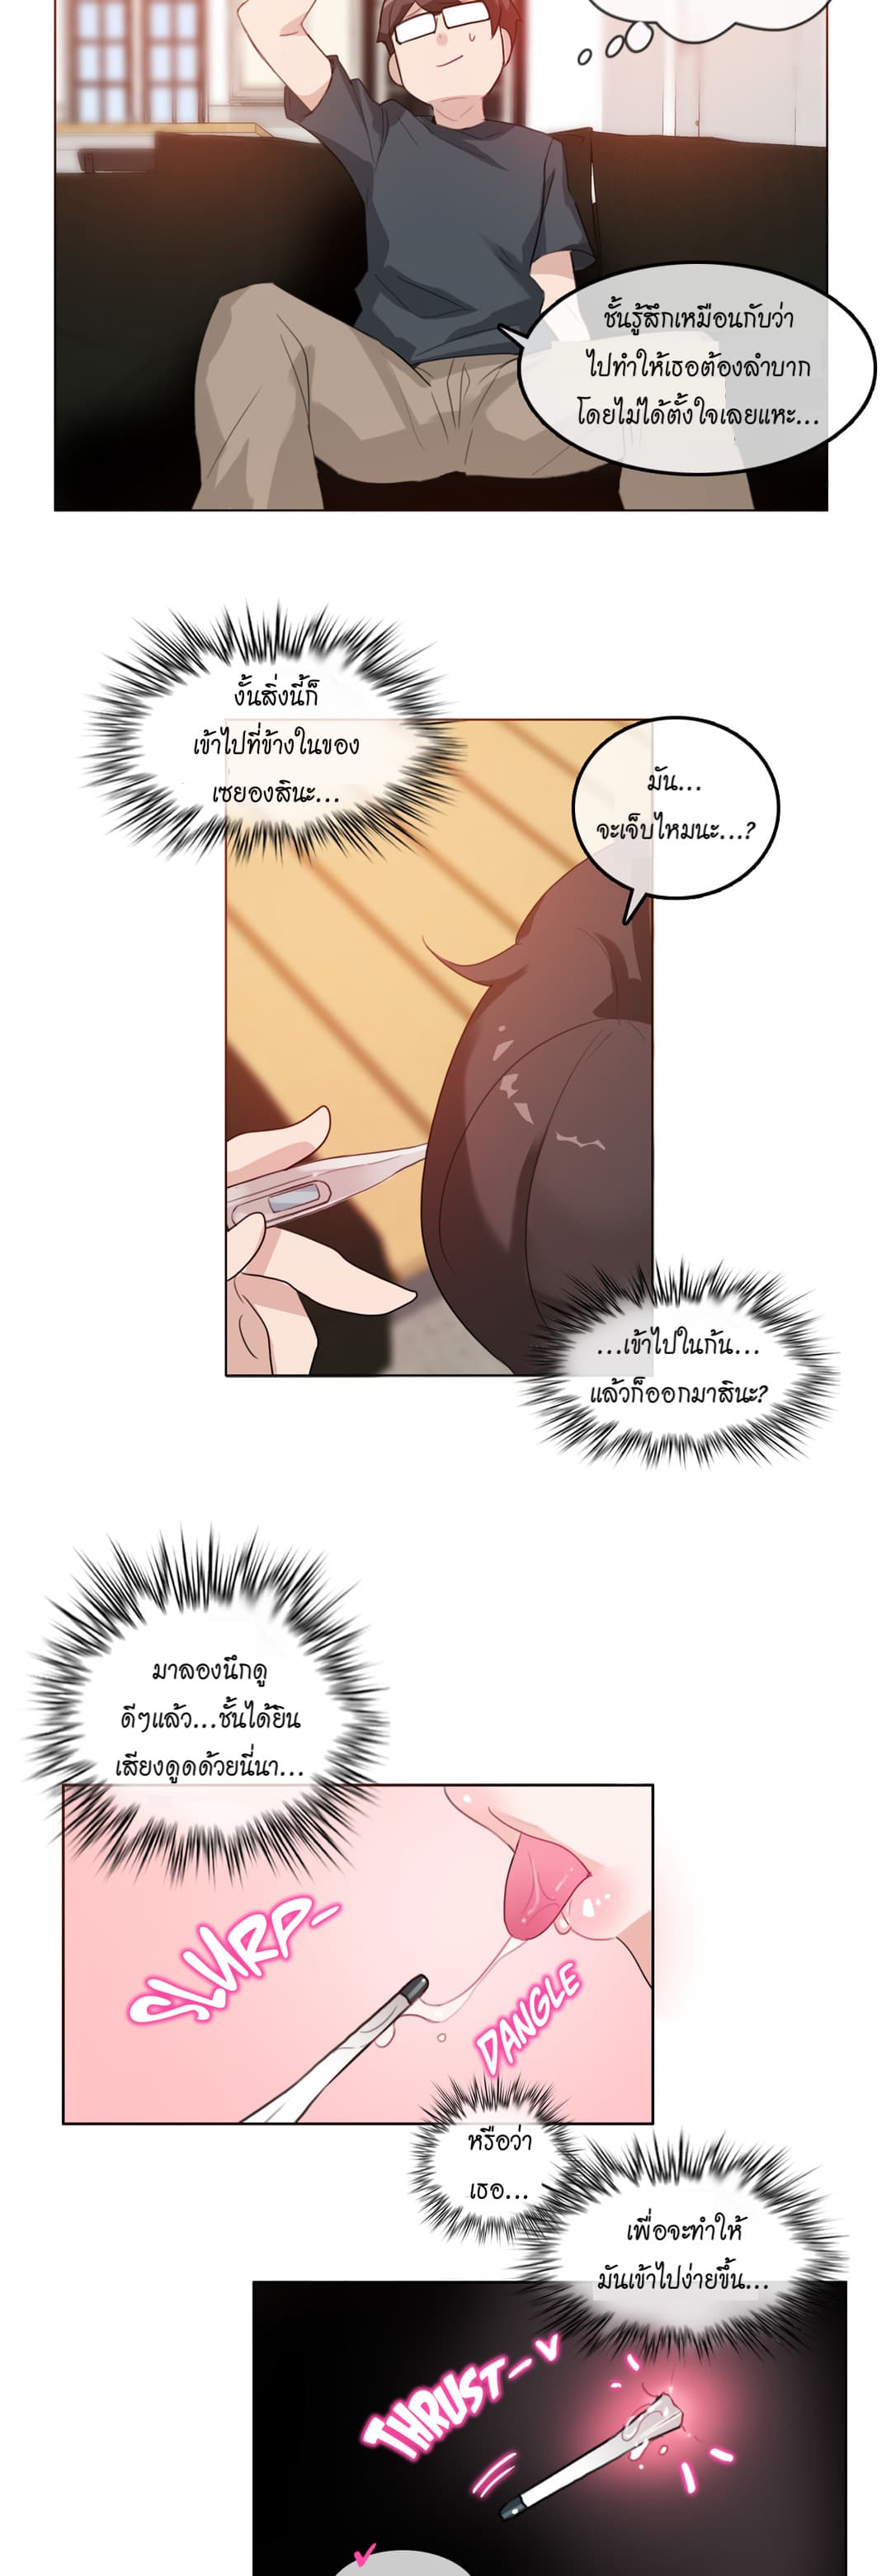 A Pervert’s Daily Life 15 (20)